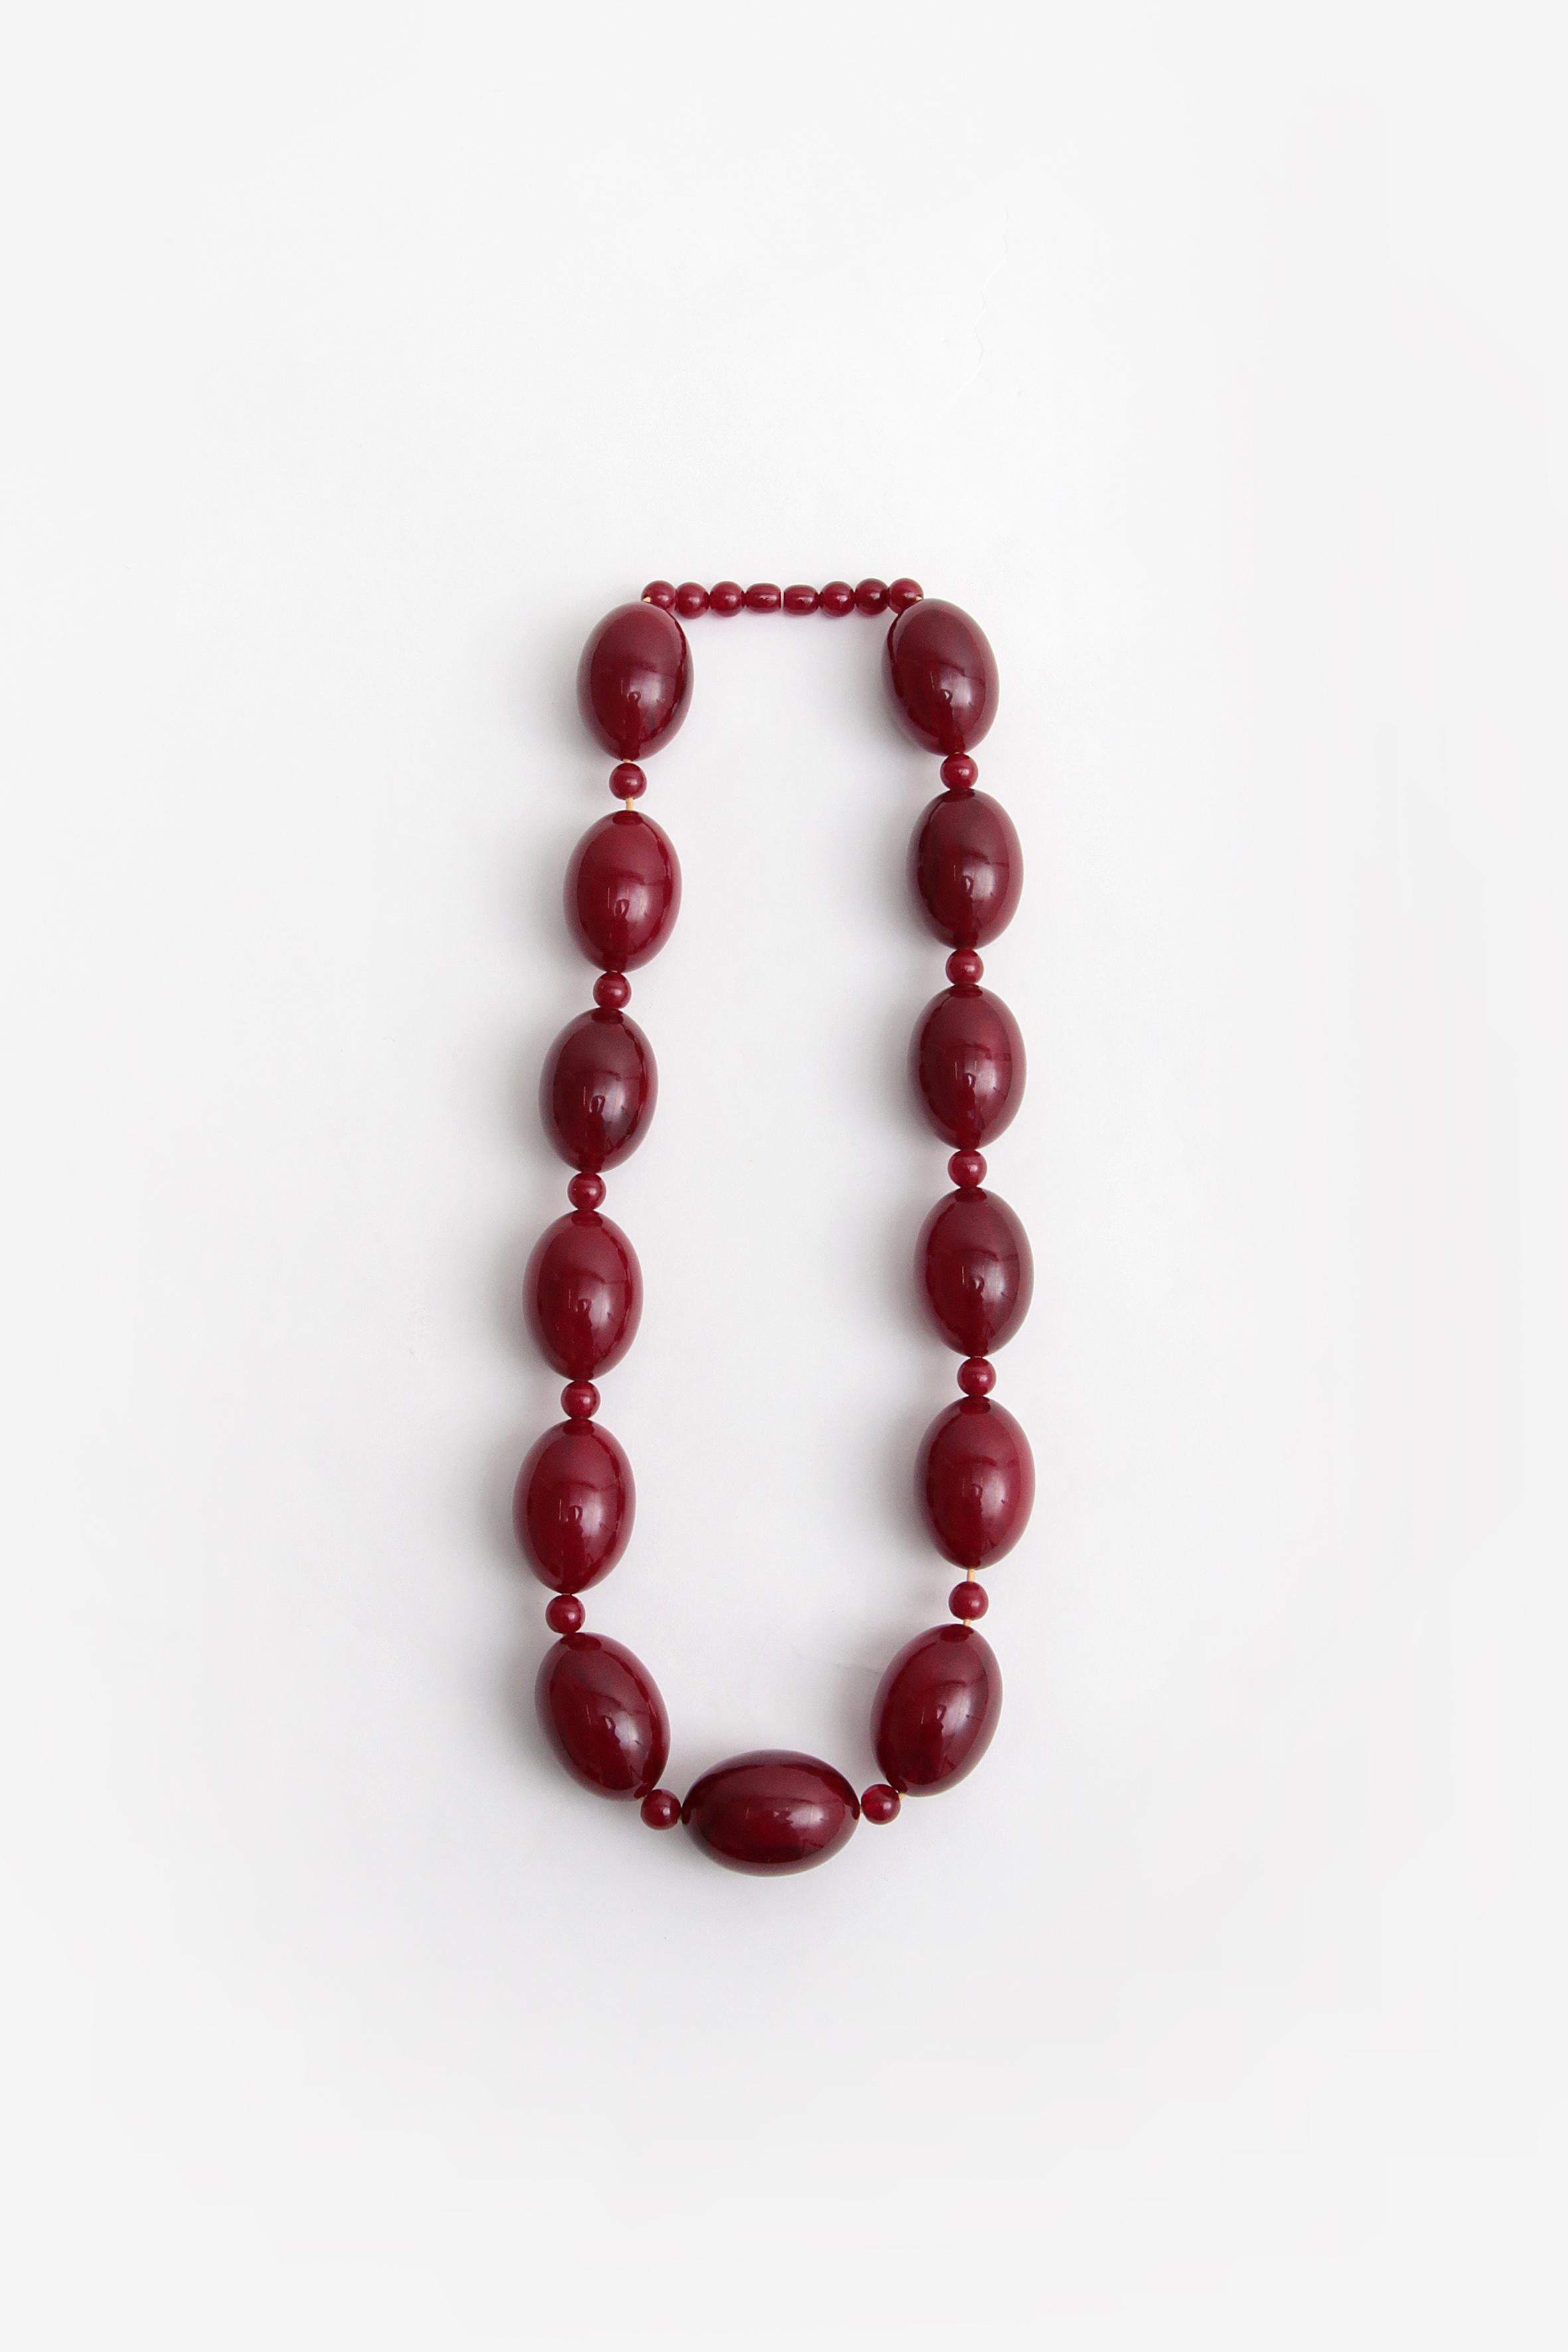 Beautiful old bakelite cherry bead necklace.

This is an exceptionally large model with beautiful thick beads.

The color is dark red, there is no clasp on this necklace.

This necklace has 13 large beads and a number of small beads.

Chain